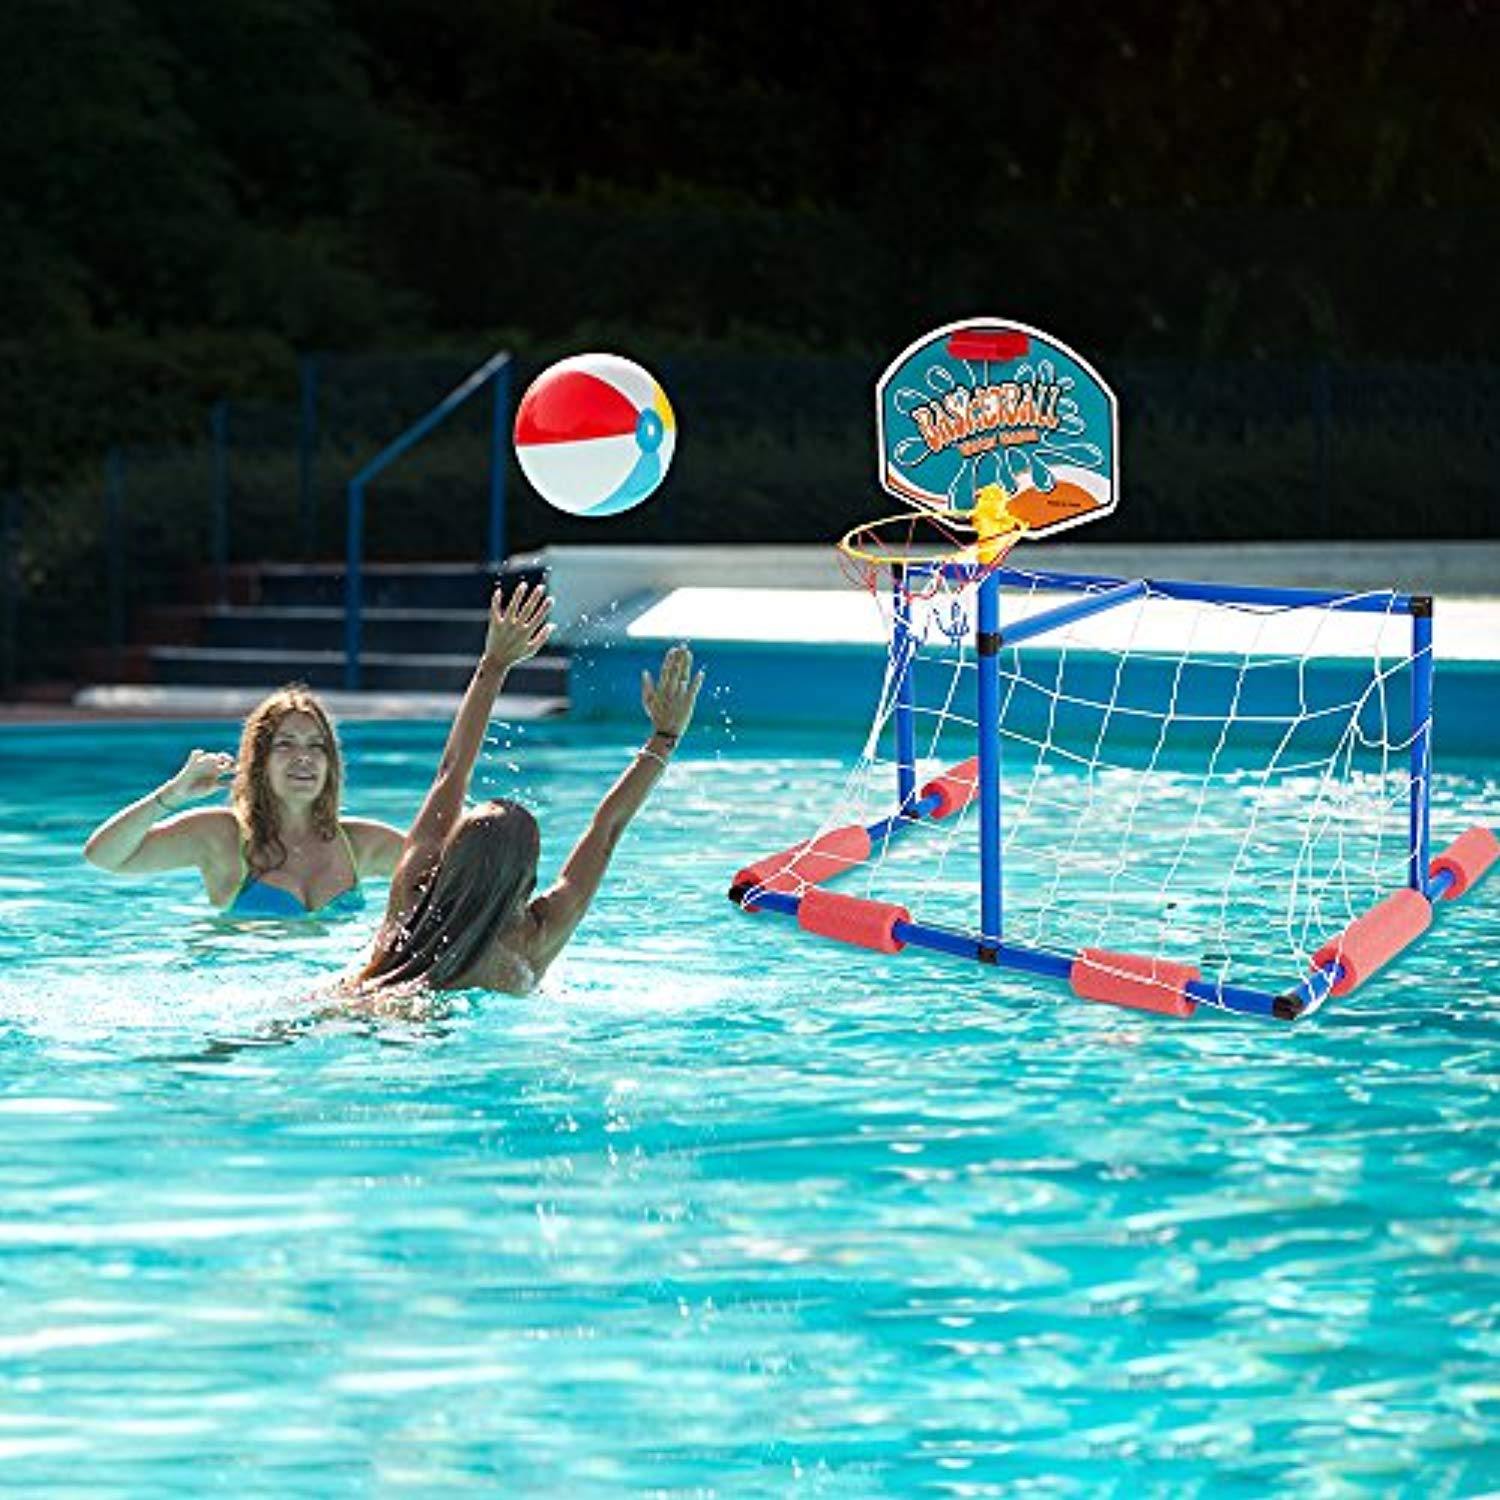 Bosonshop 2 in 1 Water Sport Game ,Water Polo with Basketball Stand for Play